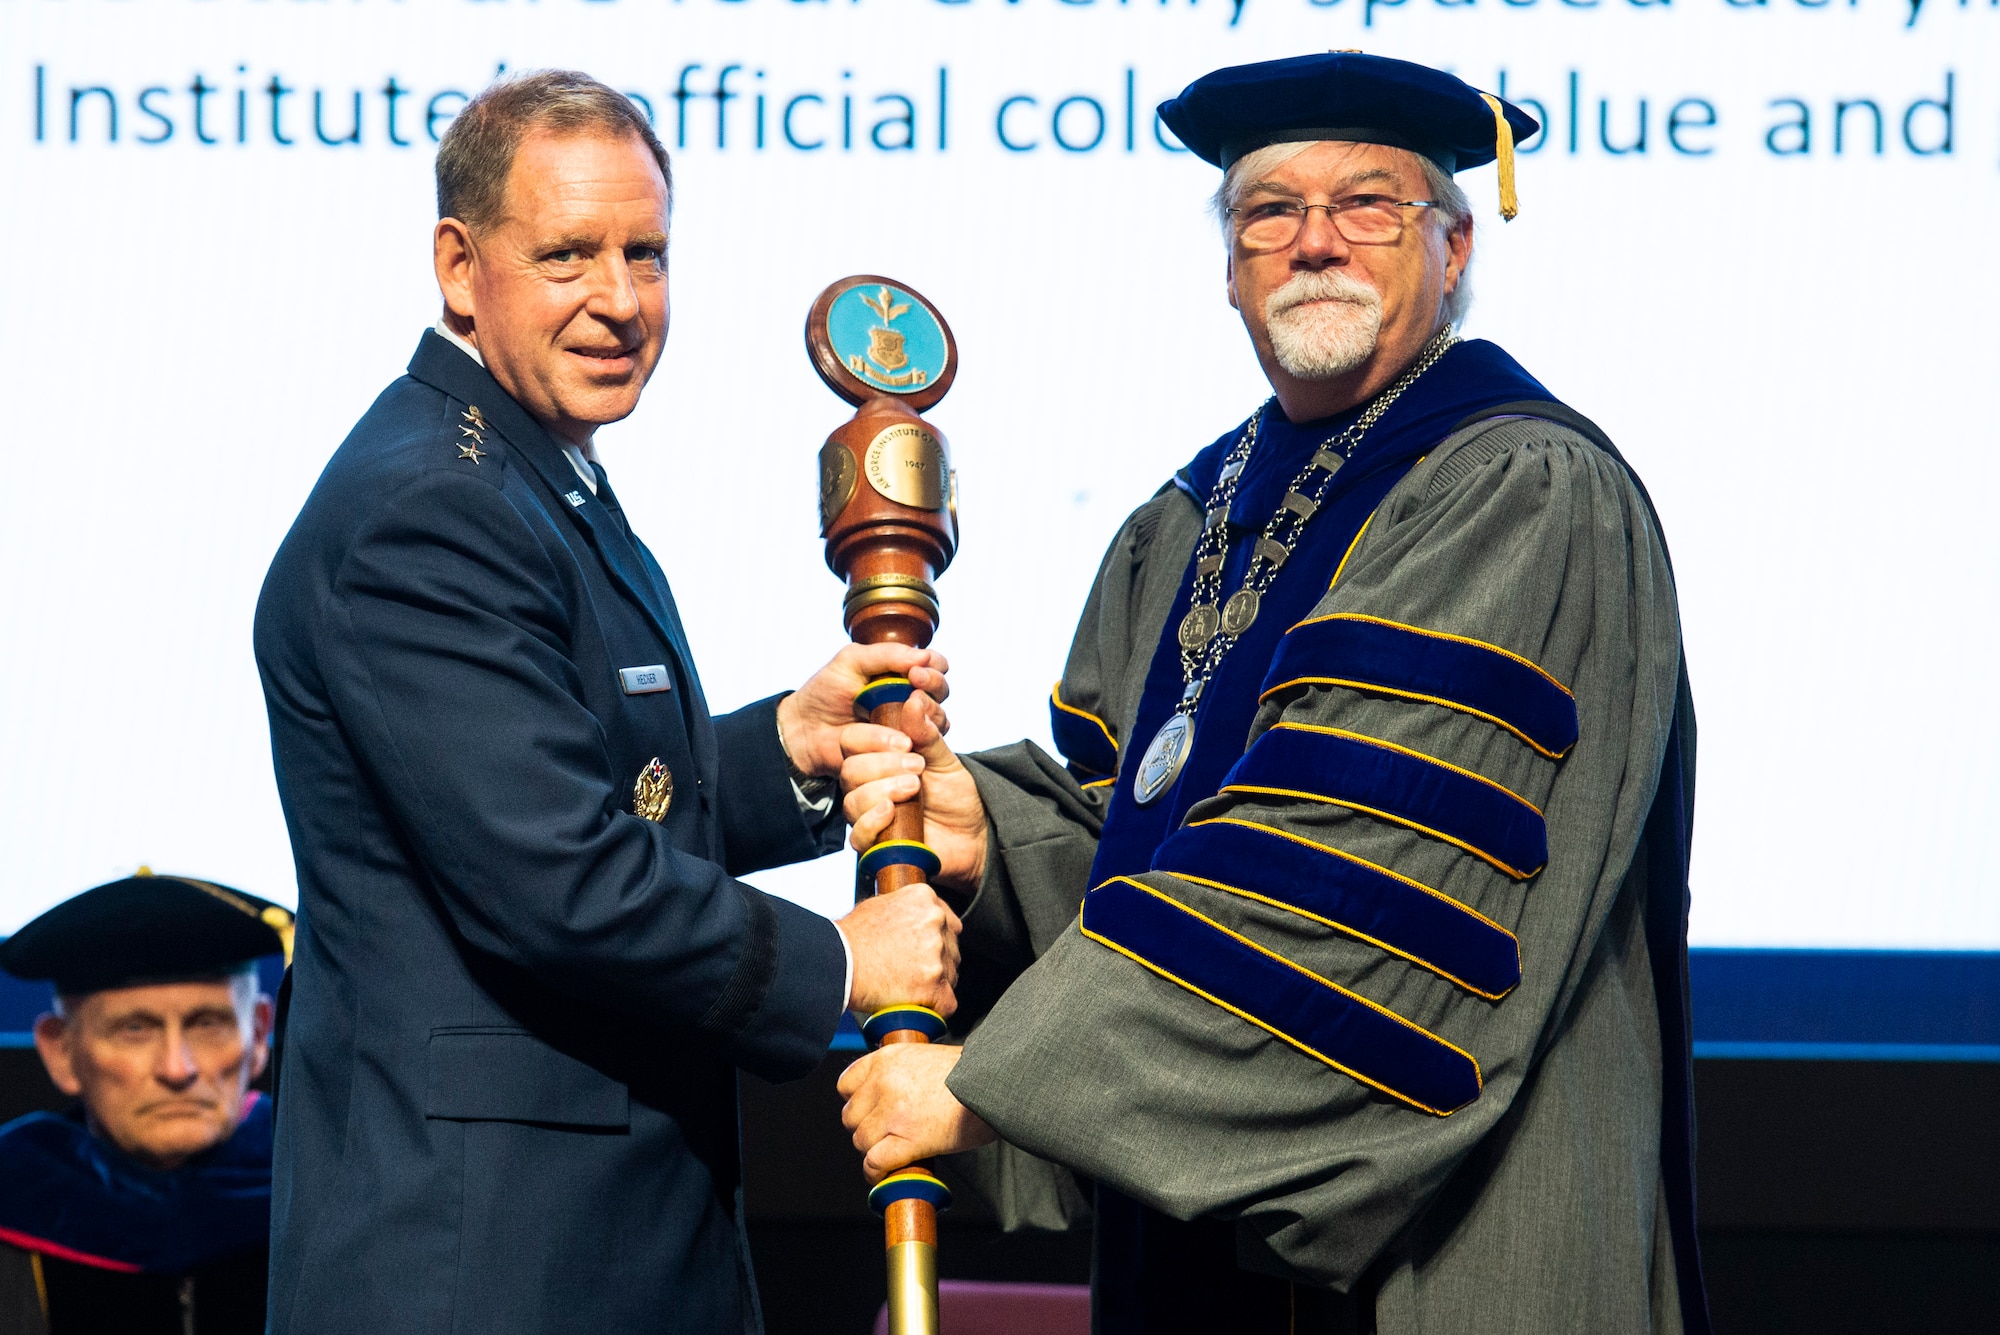 Lt. Gen. James Hecker, Air University commander and president, passes the Air Force Institute of Technology mace to Walter Jones as he accepts the role of director and chancellor during a ceremony July 27 at Wright-Patterson Air Force Base. Jones is the 50th AFIT leader and only the second civilian. (U.S. Air Force photo by Wesley Farnsworth)